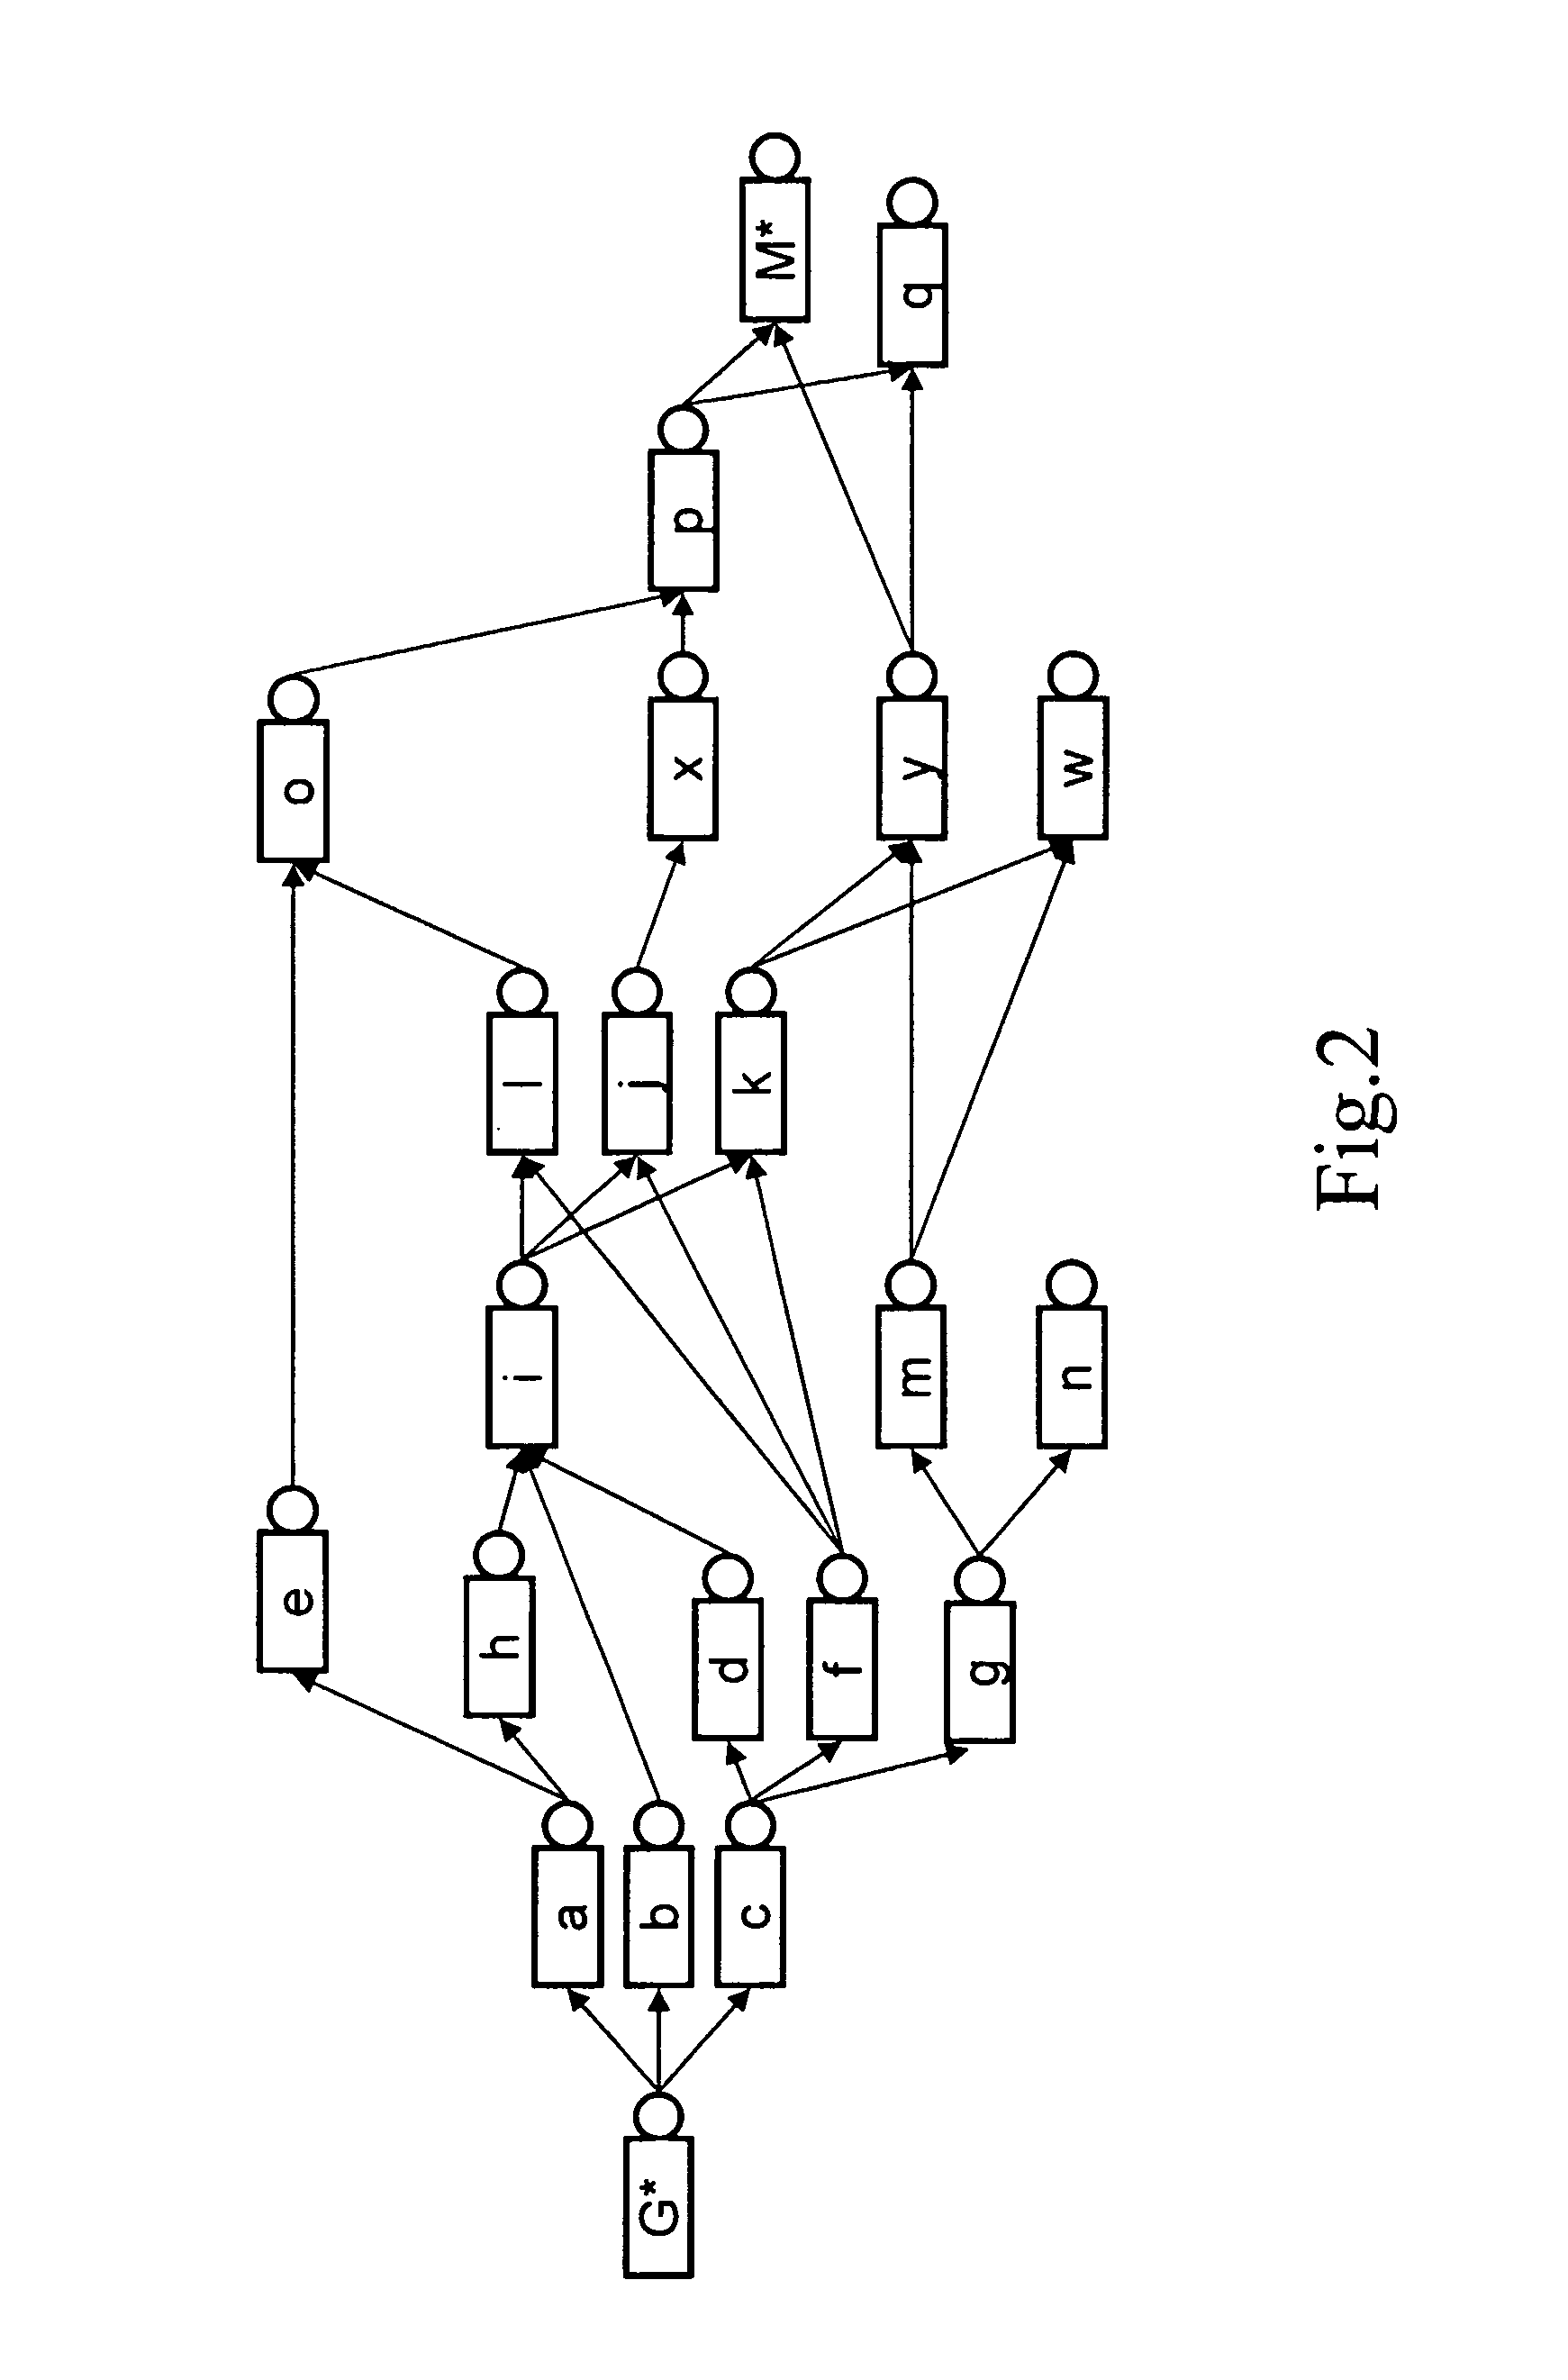 Method for configuring an optical network